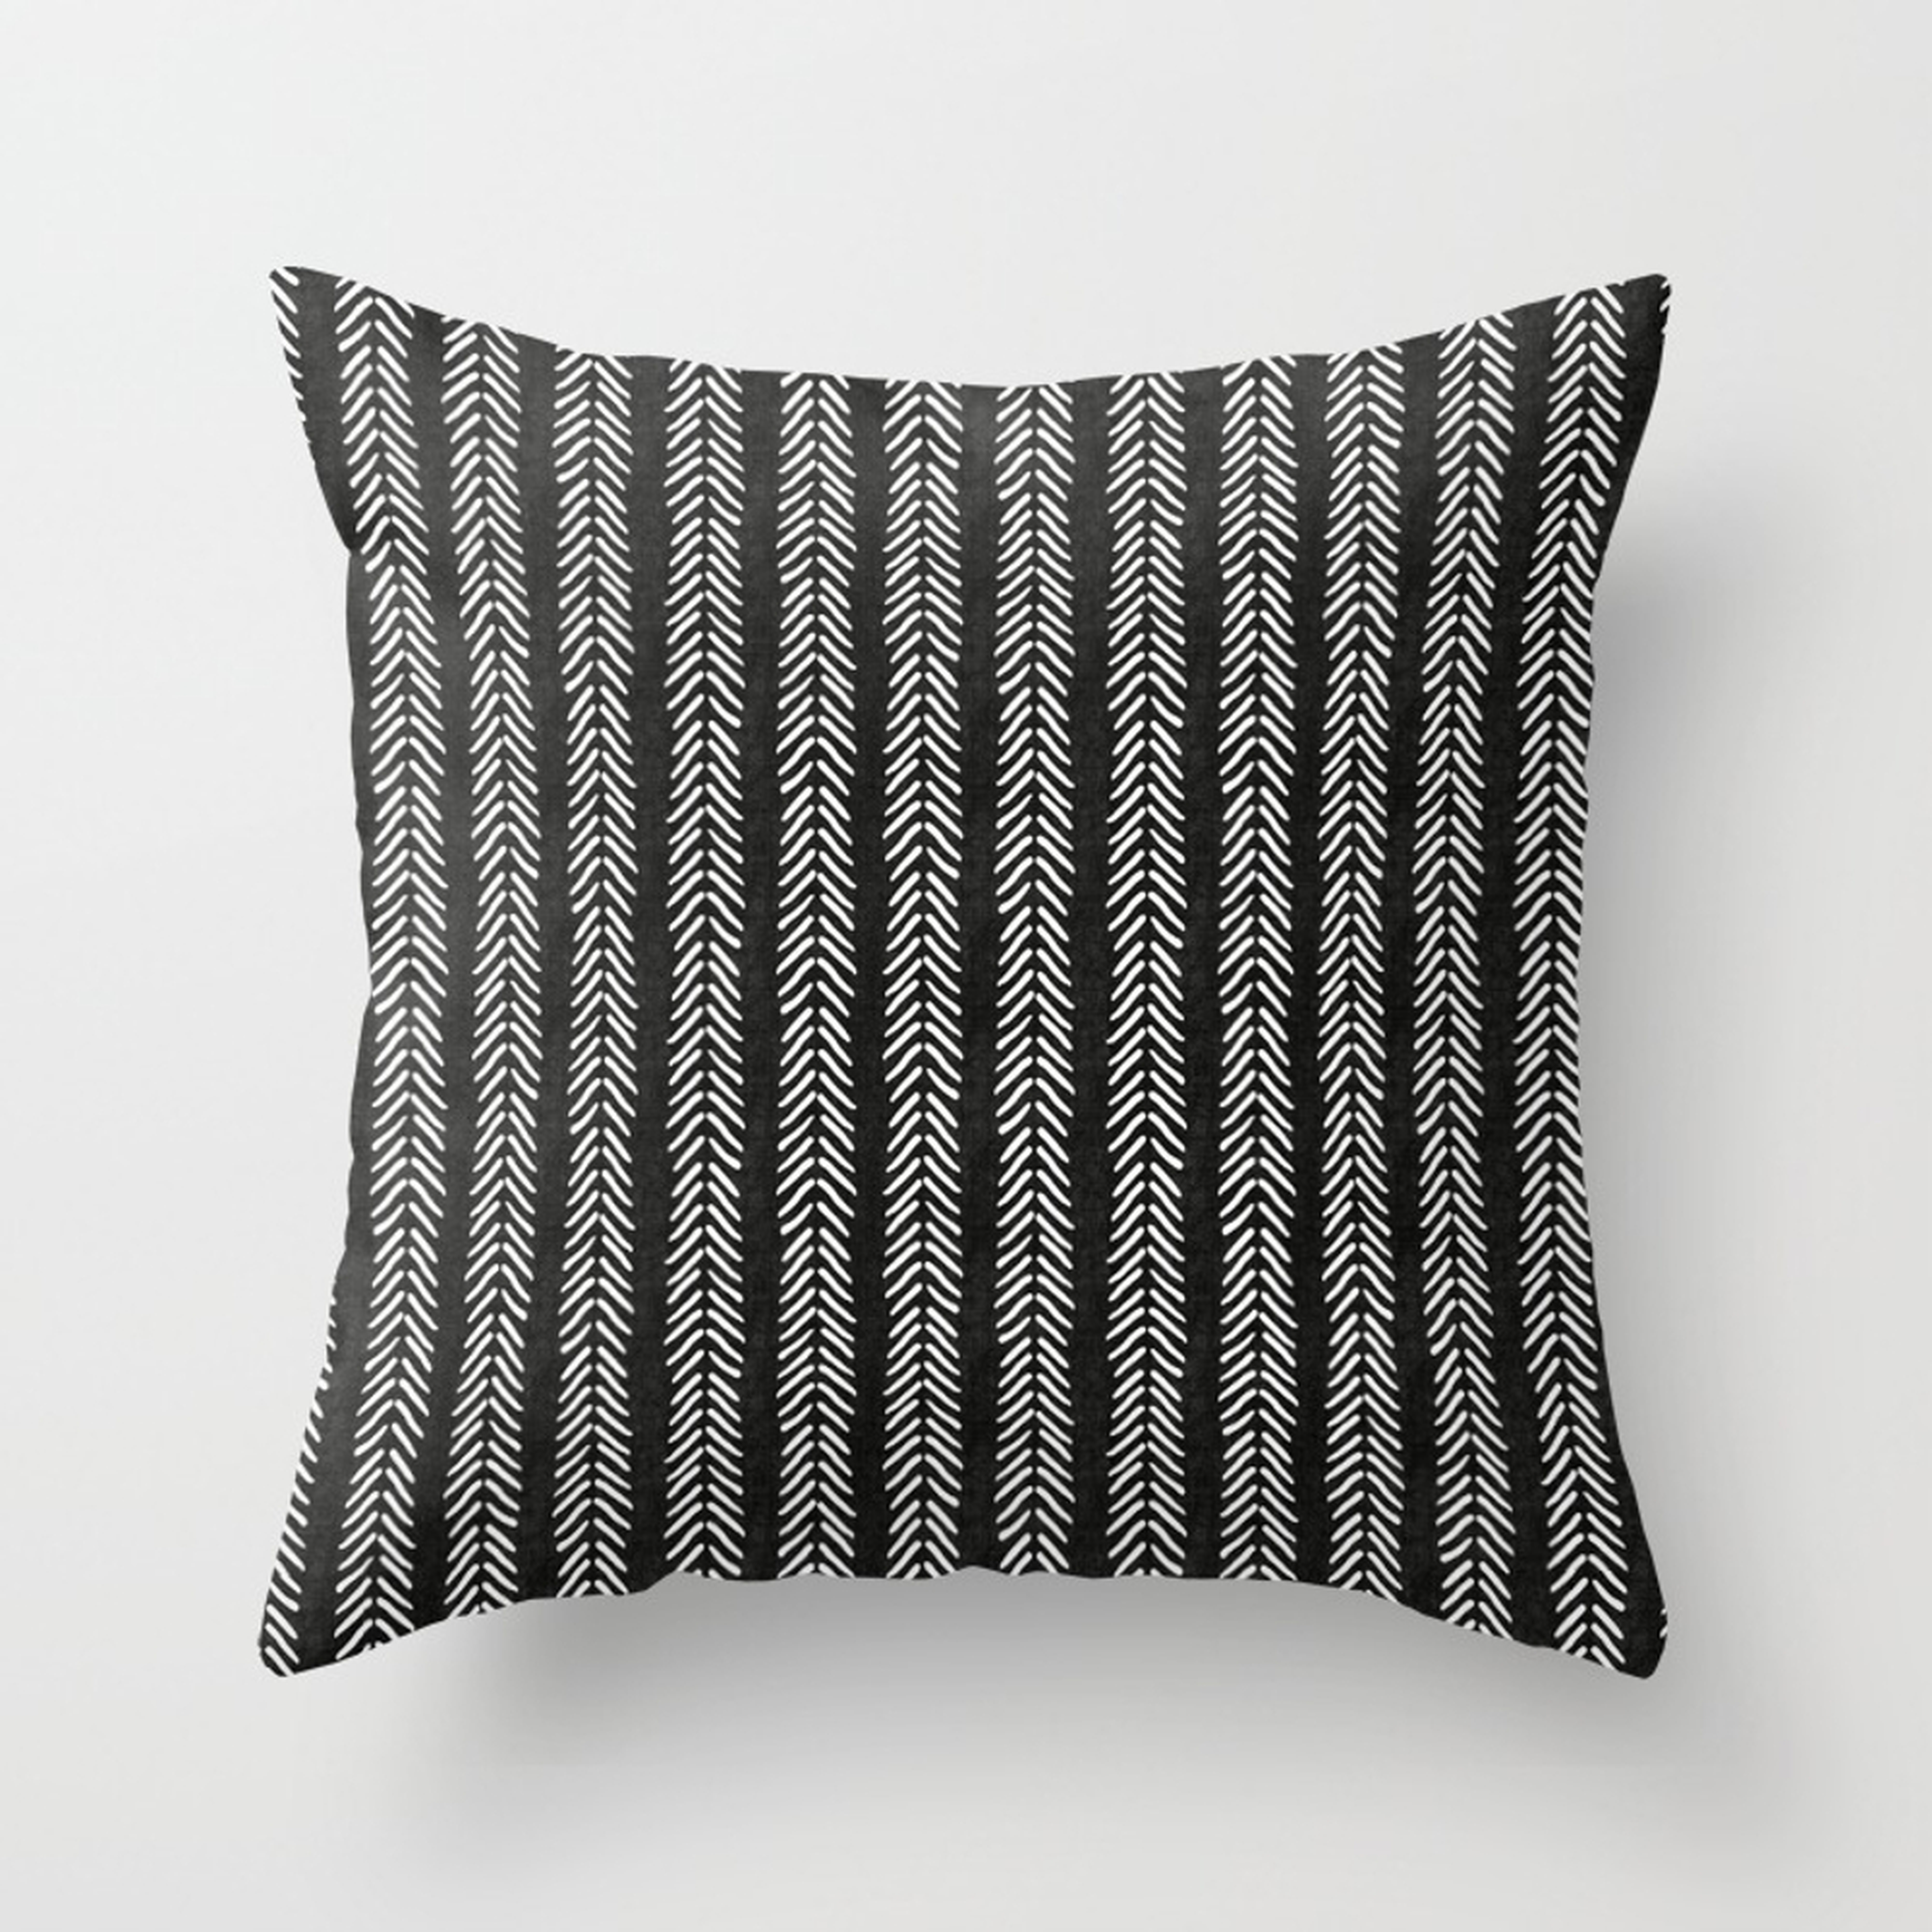 Black And White Small Arrowheads Throw Pillow by House Of Haha - Cover (16" x 16") With Pillow Insert - Indoor Pillow - Society6